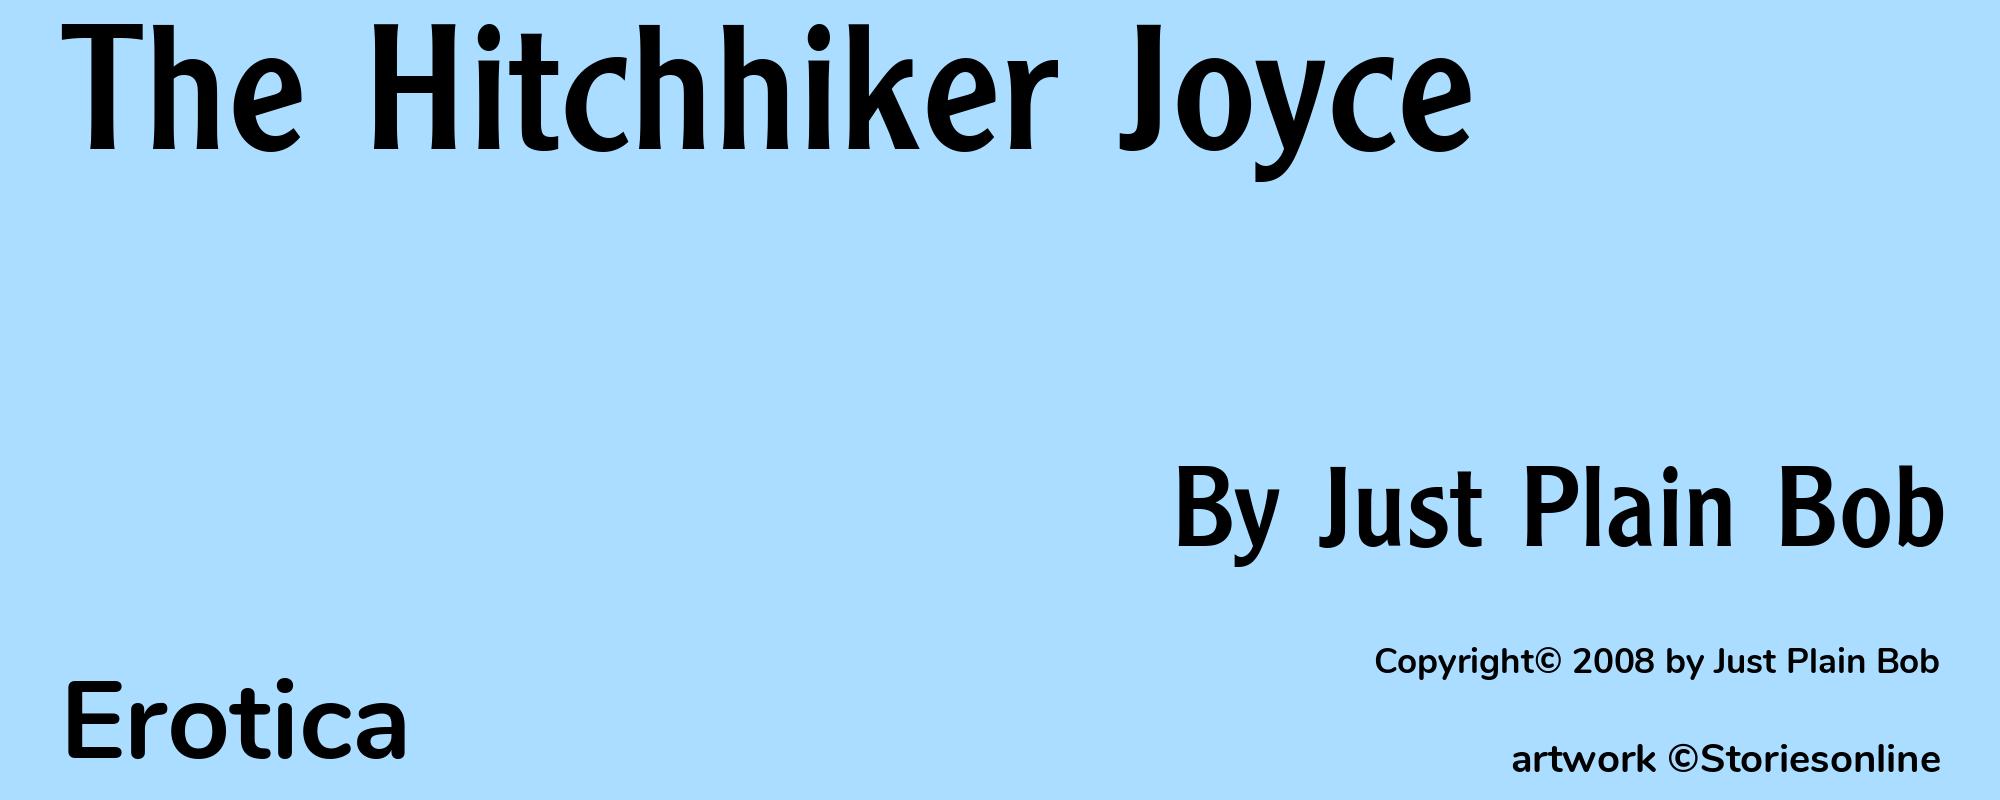 The Hitchhiker Joyce - Cover